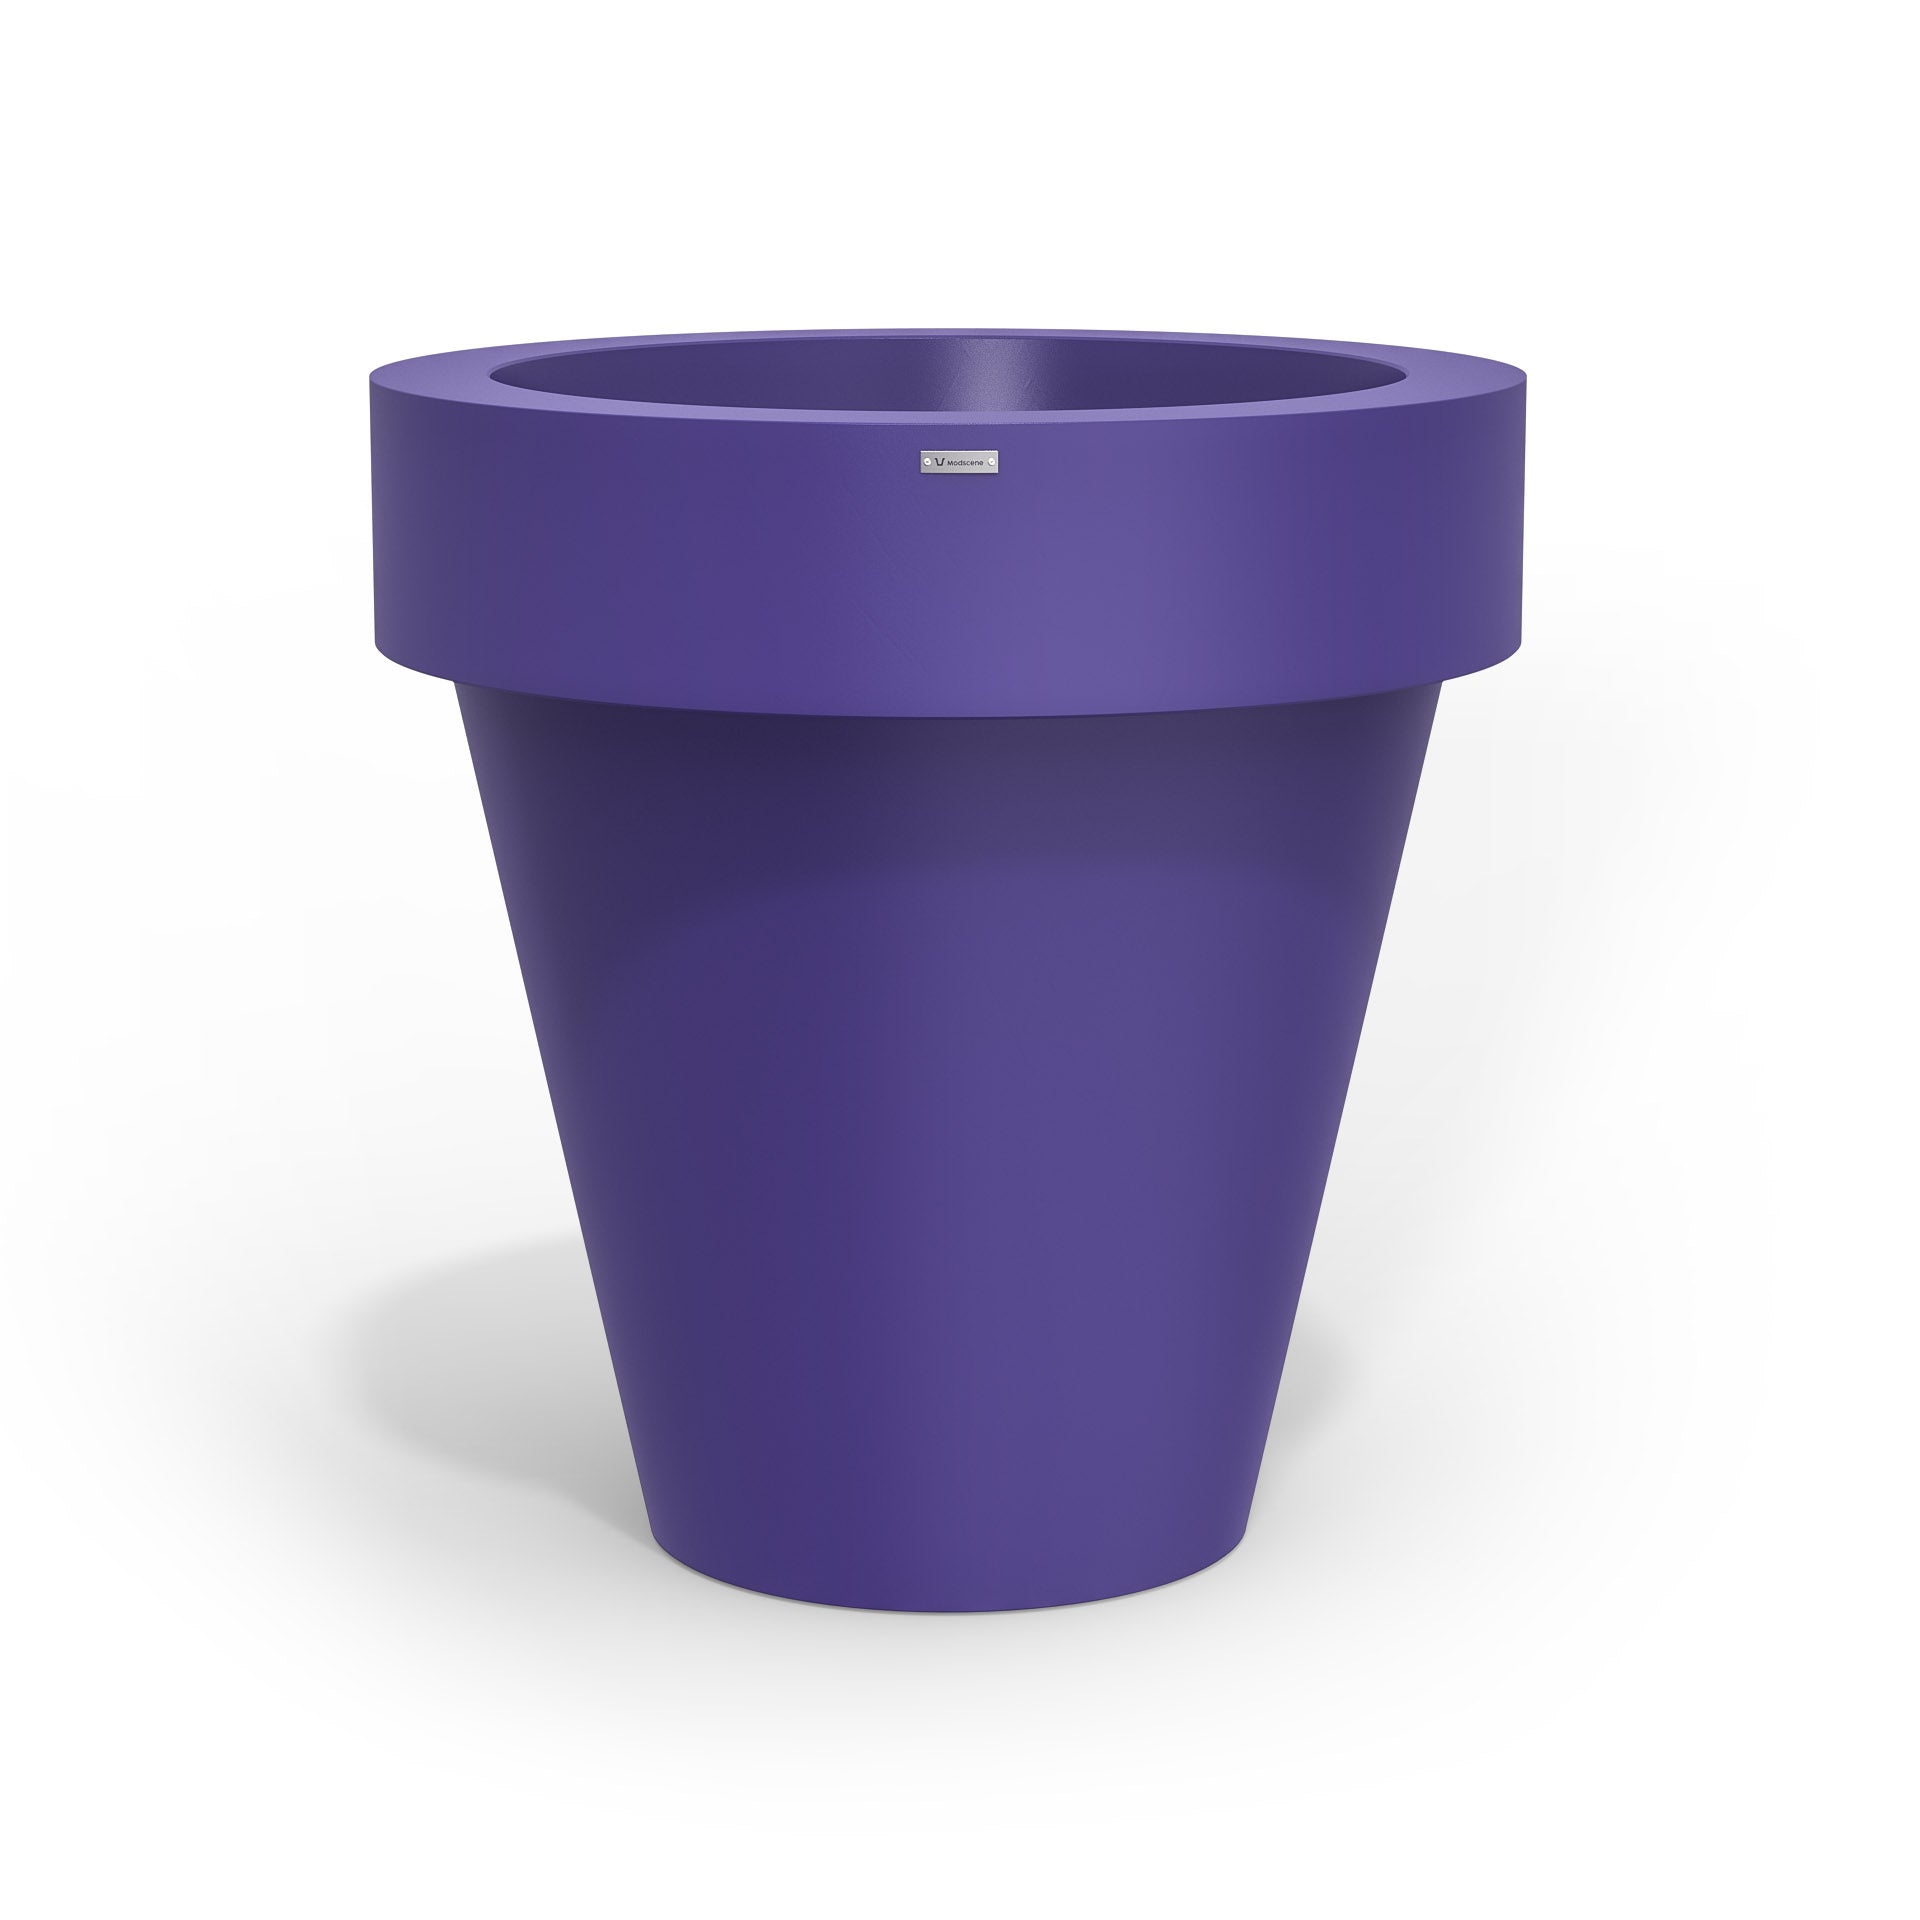 Extra large Modscene planter pot in a purple colour. Made in NZ.